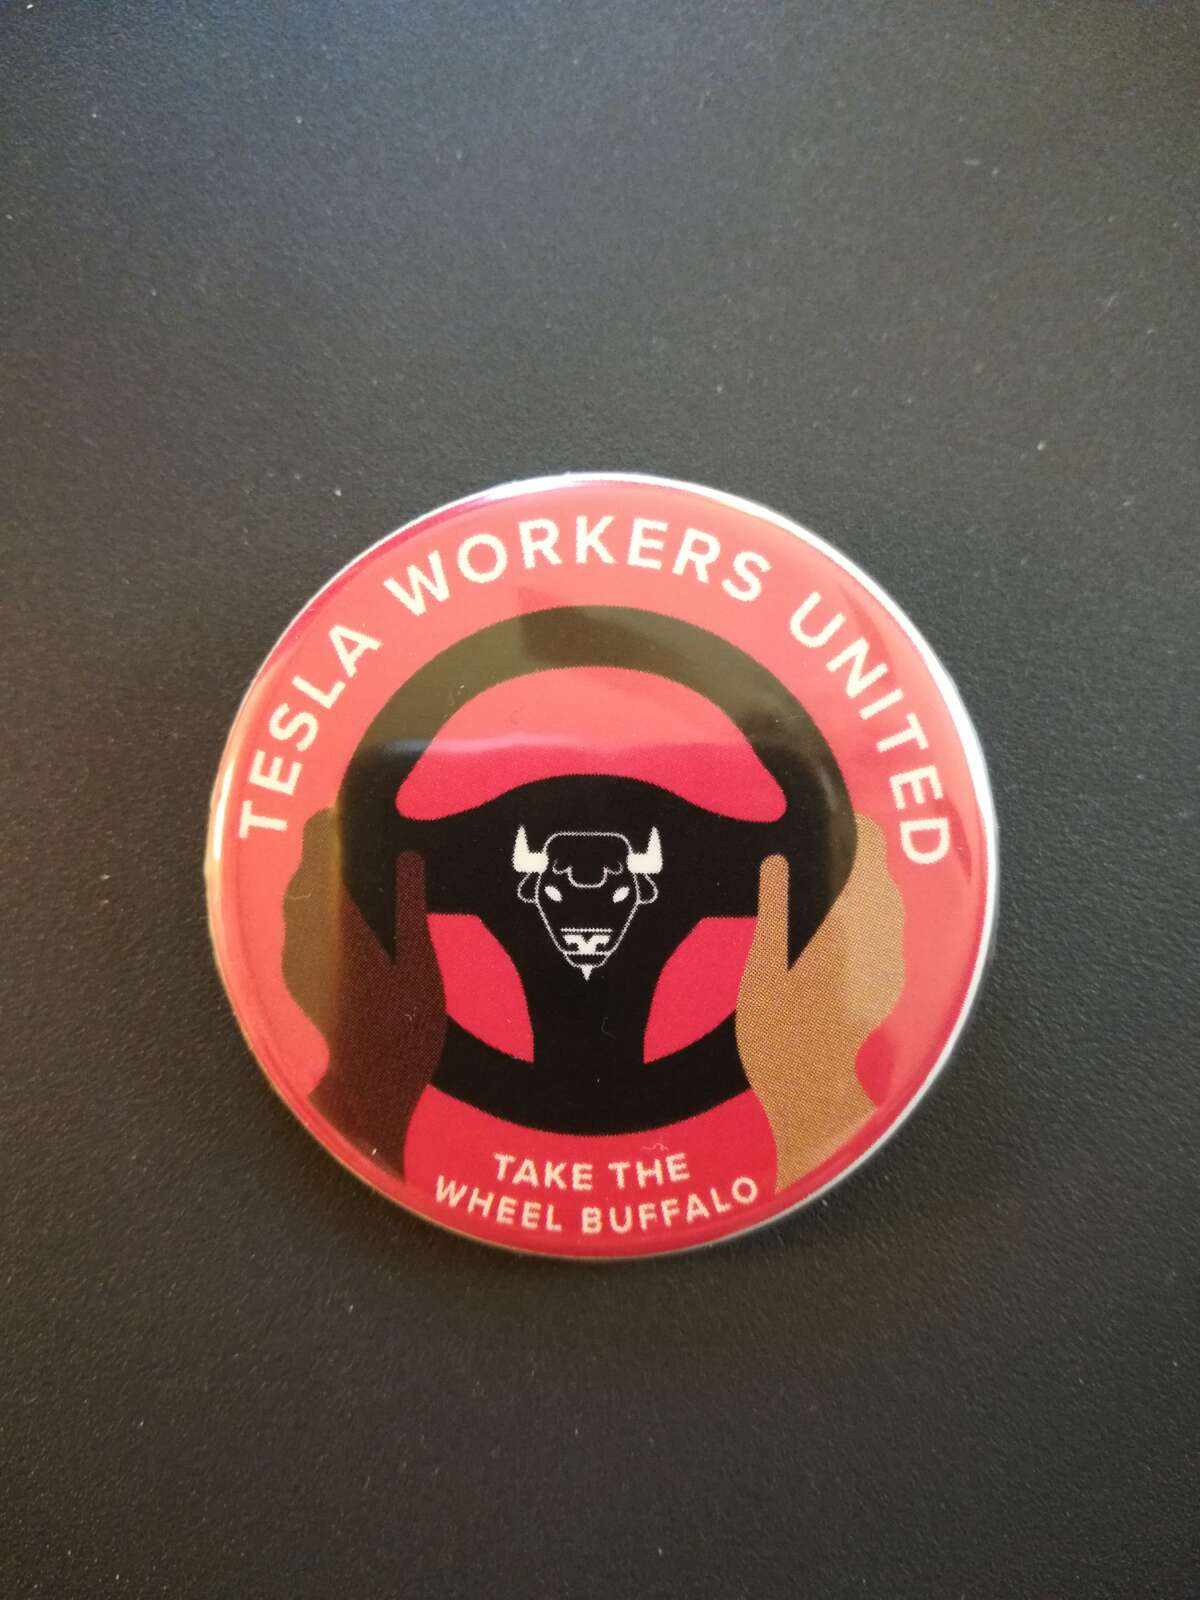 The campaign has distributed Tesla Workers United buttons such as these as part of the organizing effort.